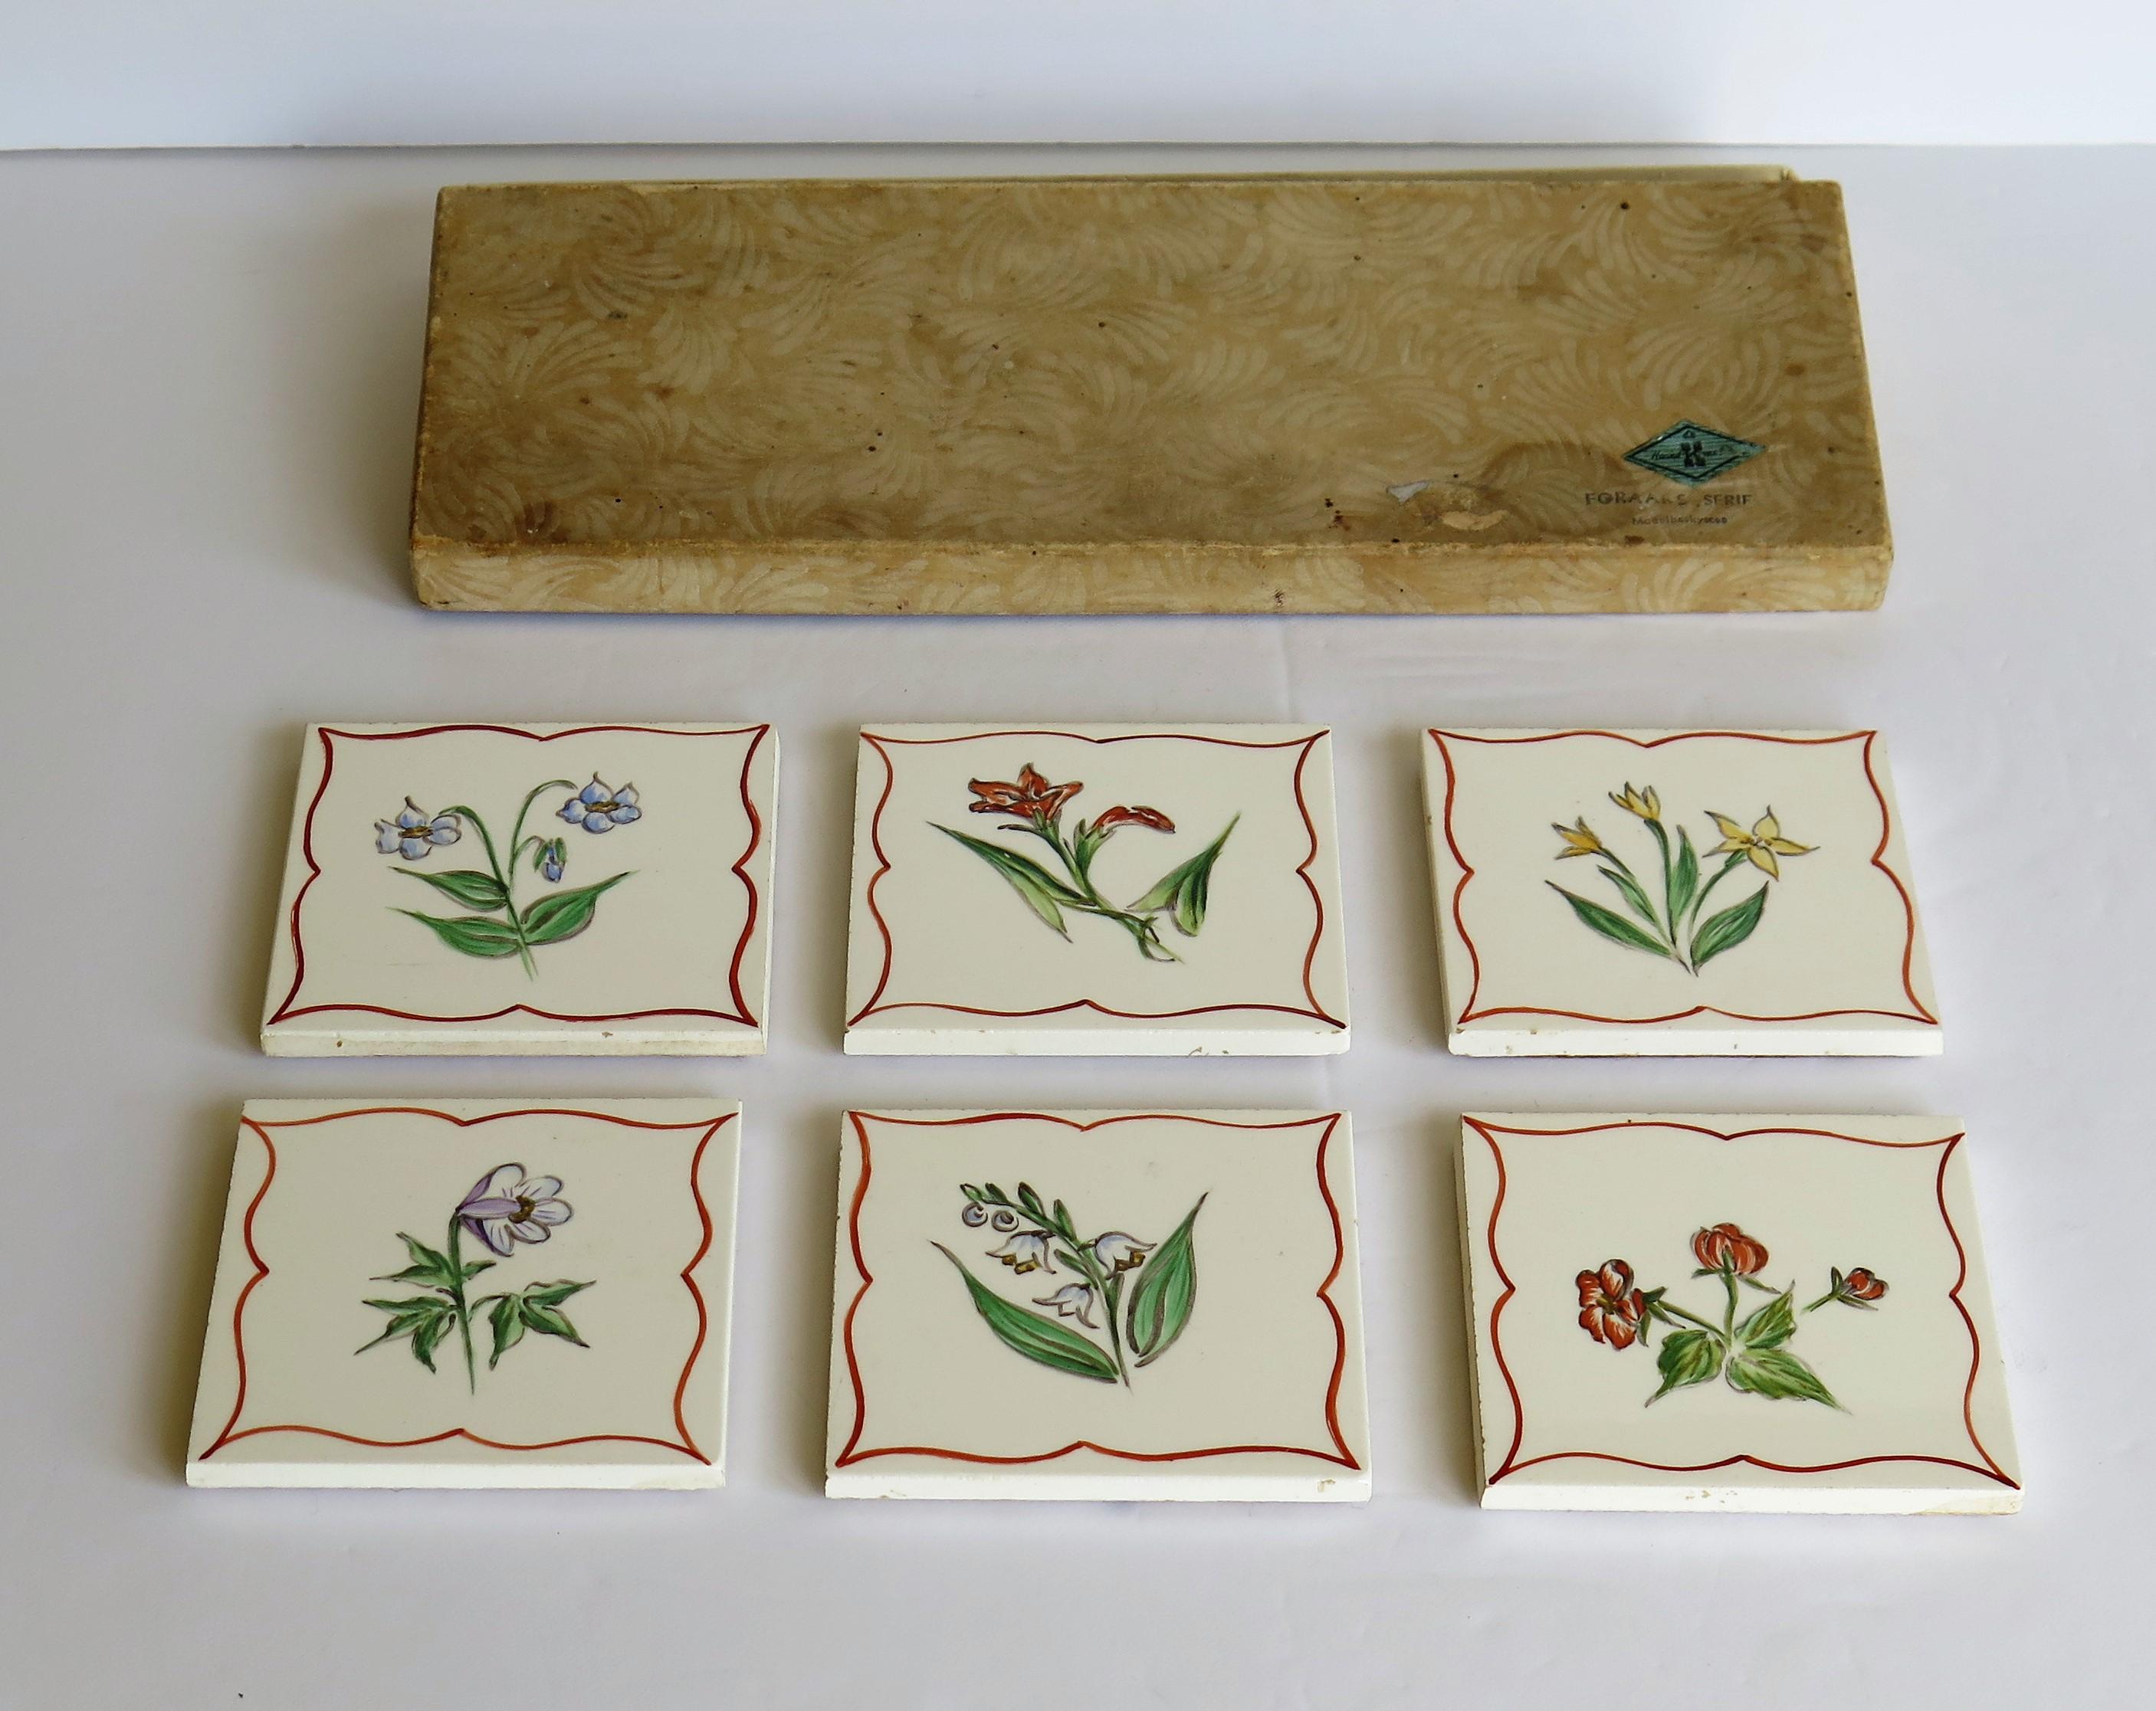 These are a good set of Six ceramic tile coasters, all hand painted with a different flower, designed by Kaj Polk and made in Denmark, complete with their original box.

Each tile or tile coaster is nominally 3 inches square and cork